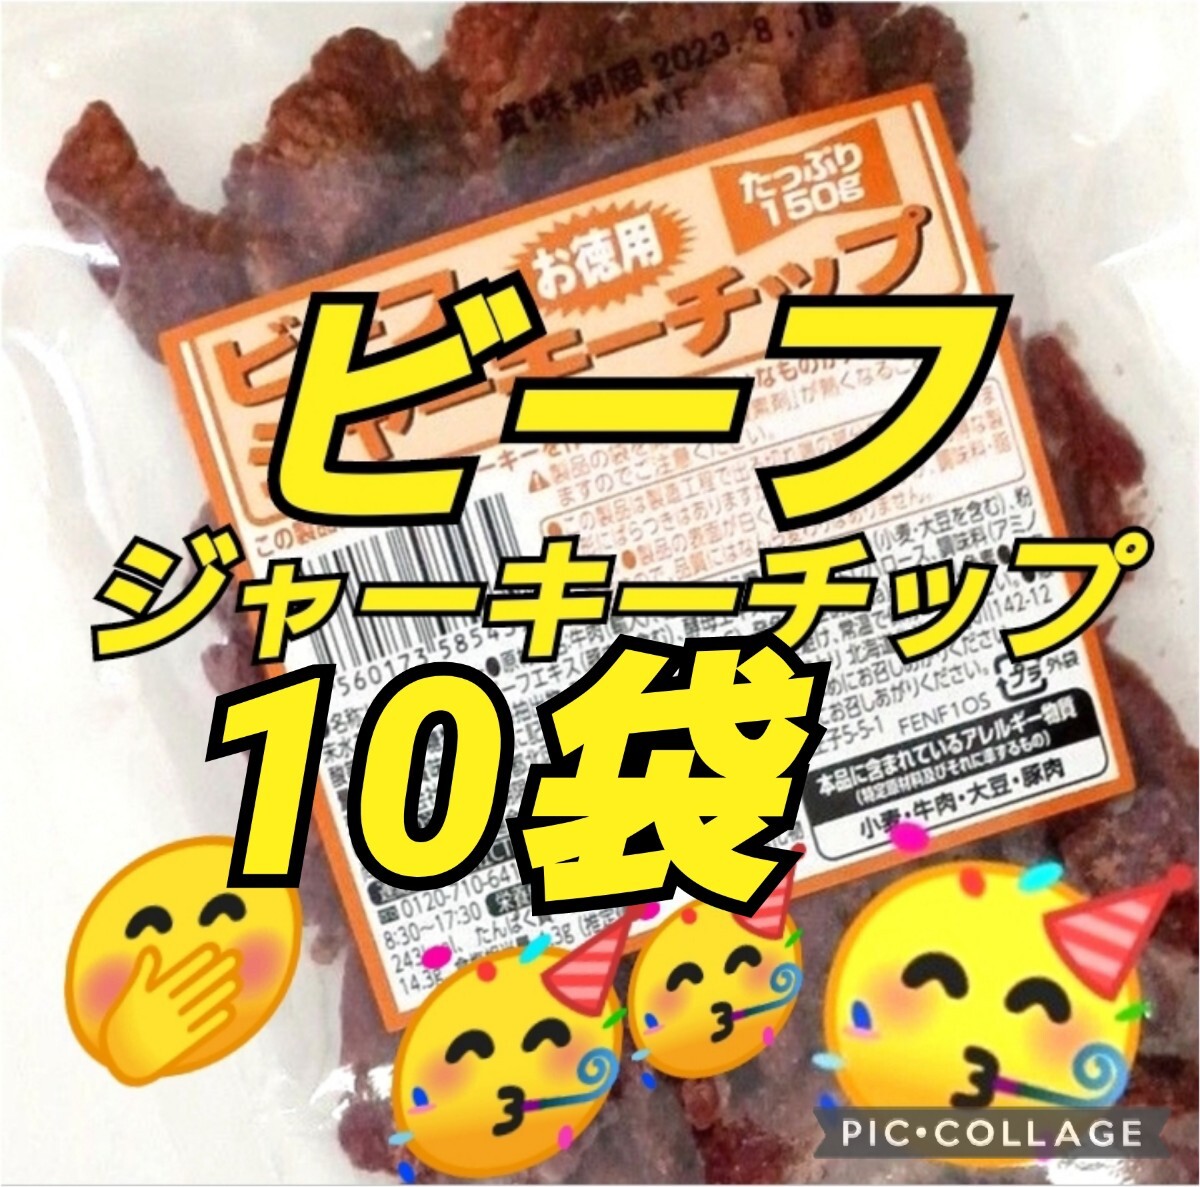  economical 150g...* beef jerky limited amount limited time ... peak beef jerky snack bite Event your order gourmet 